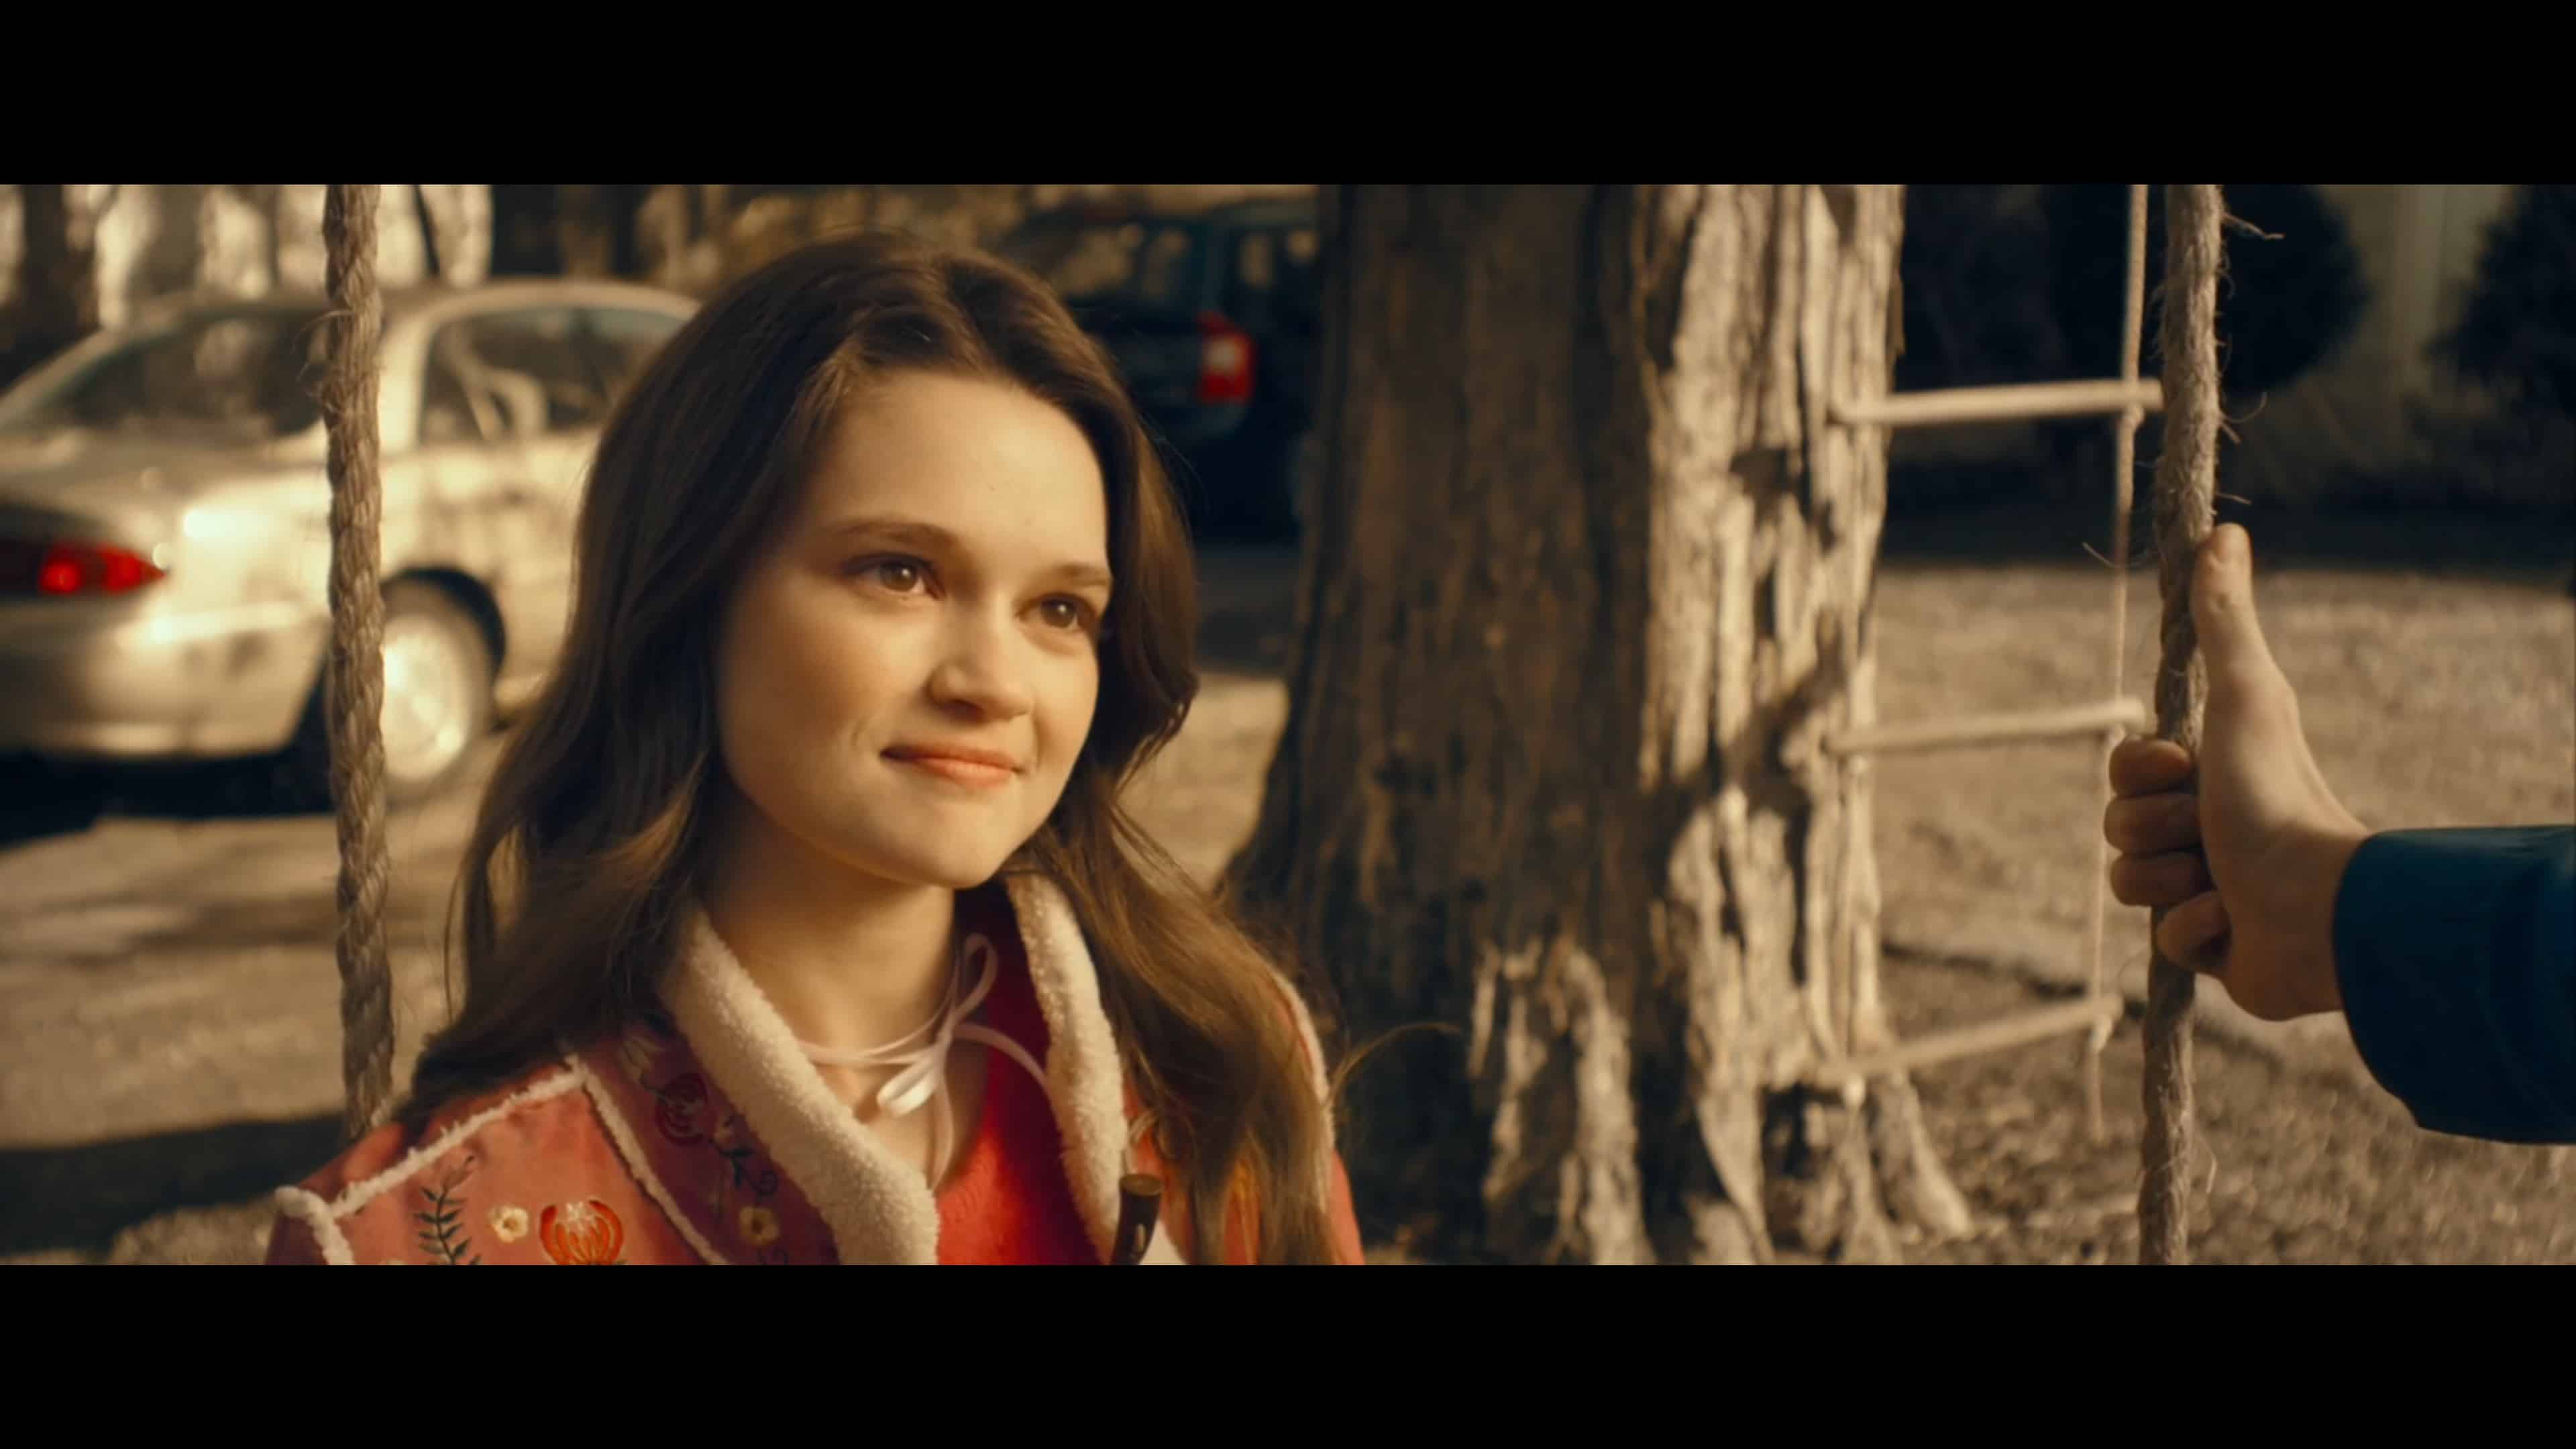 Ciara Bravo as Emily, when Cherry met her in college